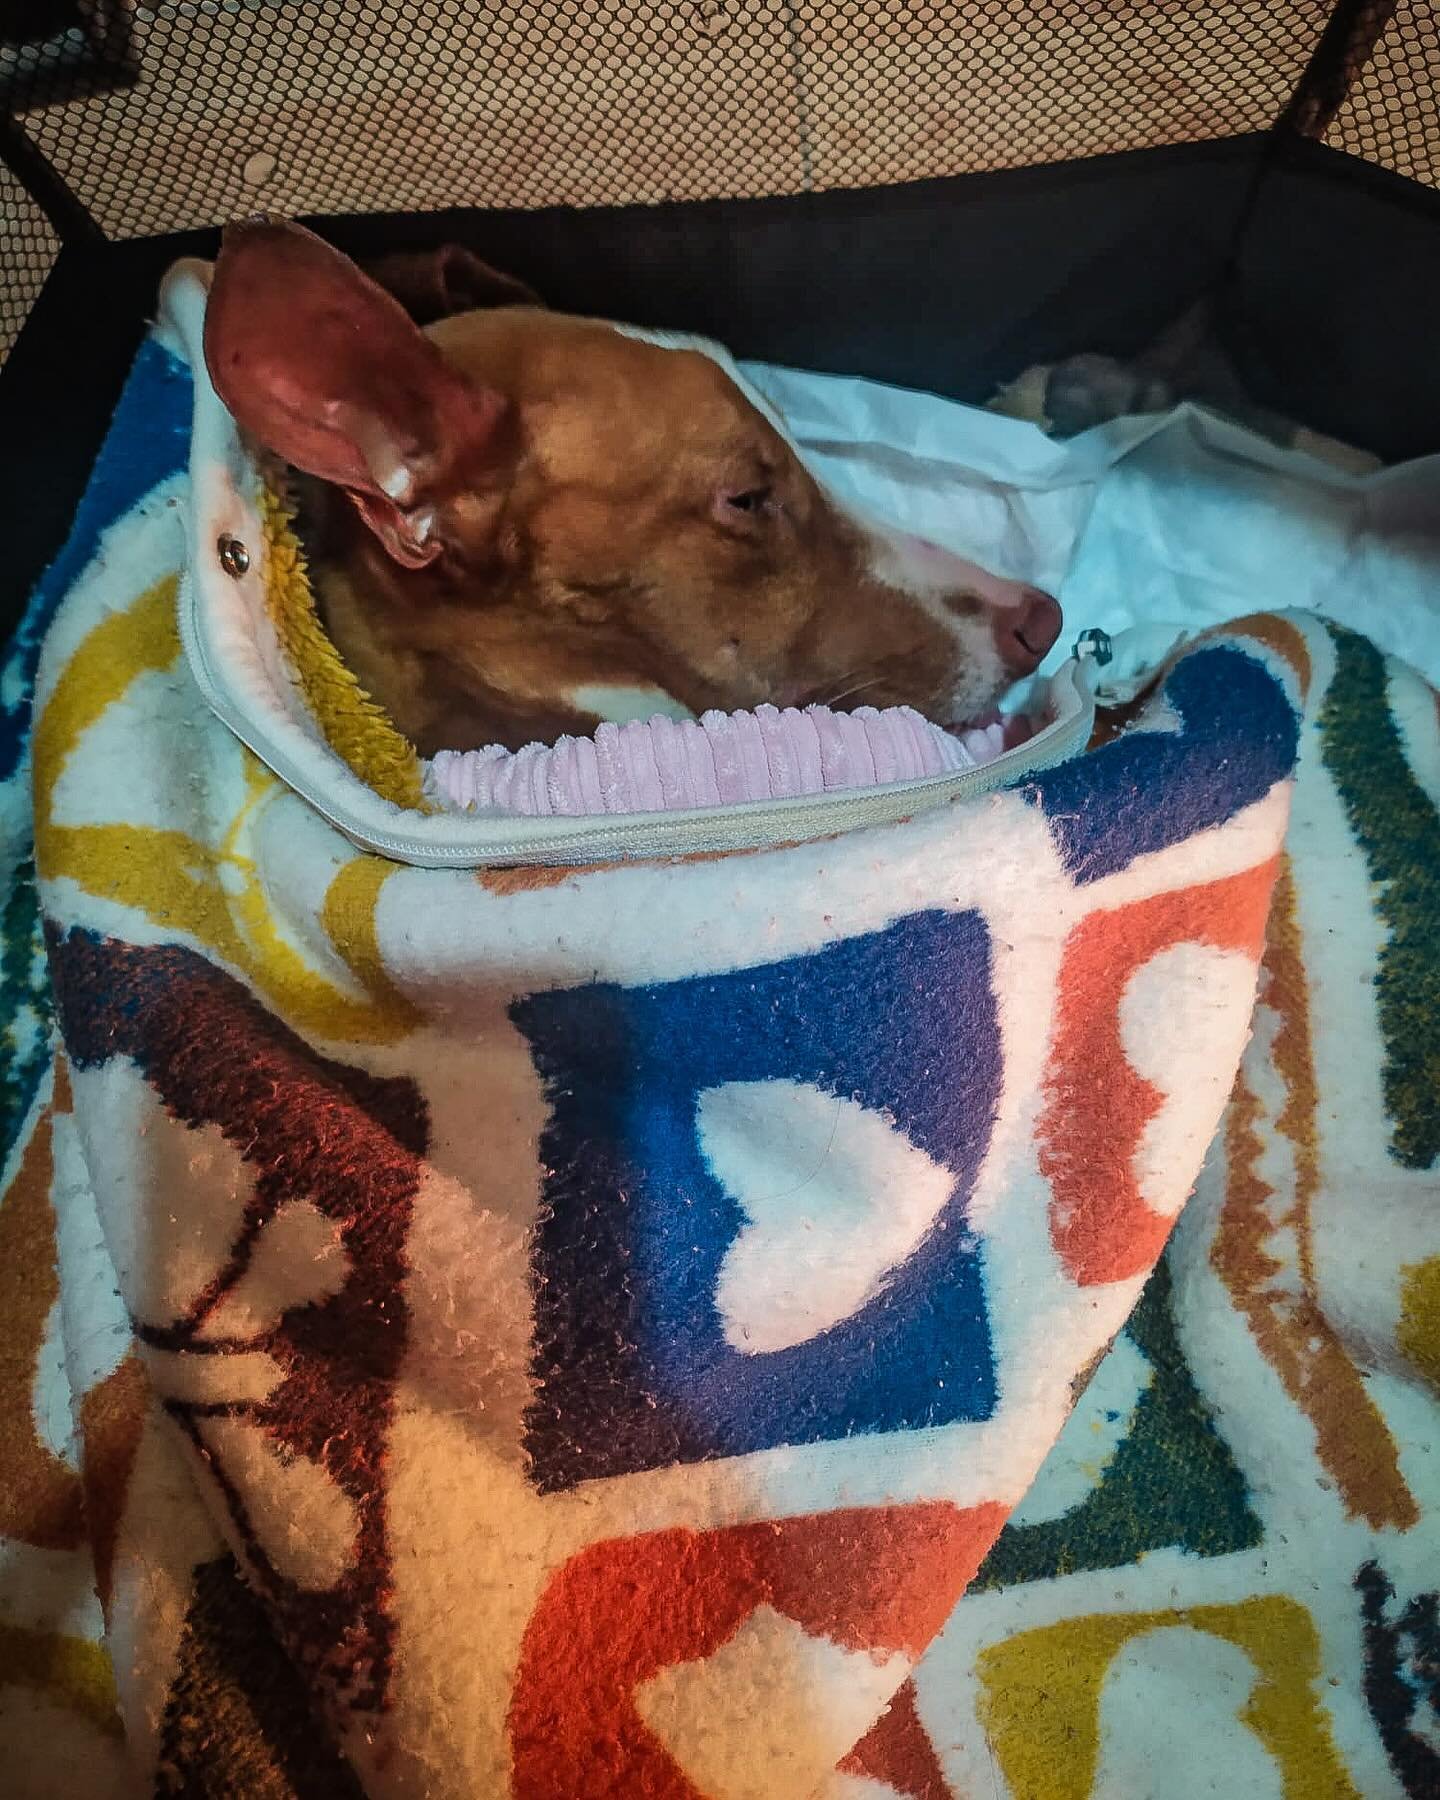 Today, 1st May, marks International Day of the Podenco. 

Spirit is one of the victims, a first hand account of how these dogs are treated. Today was a holiday in Spain with the vets being shut so after him being stabilised there yesterday, his wonde